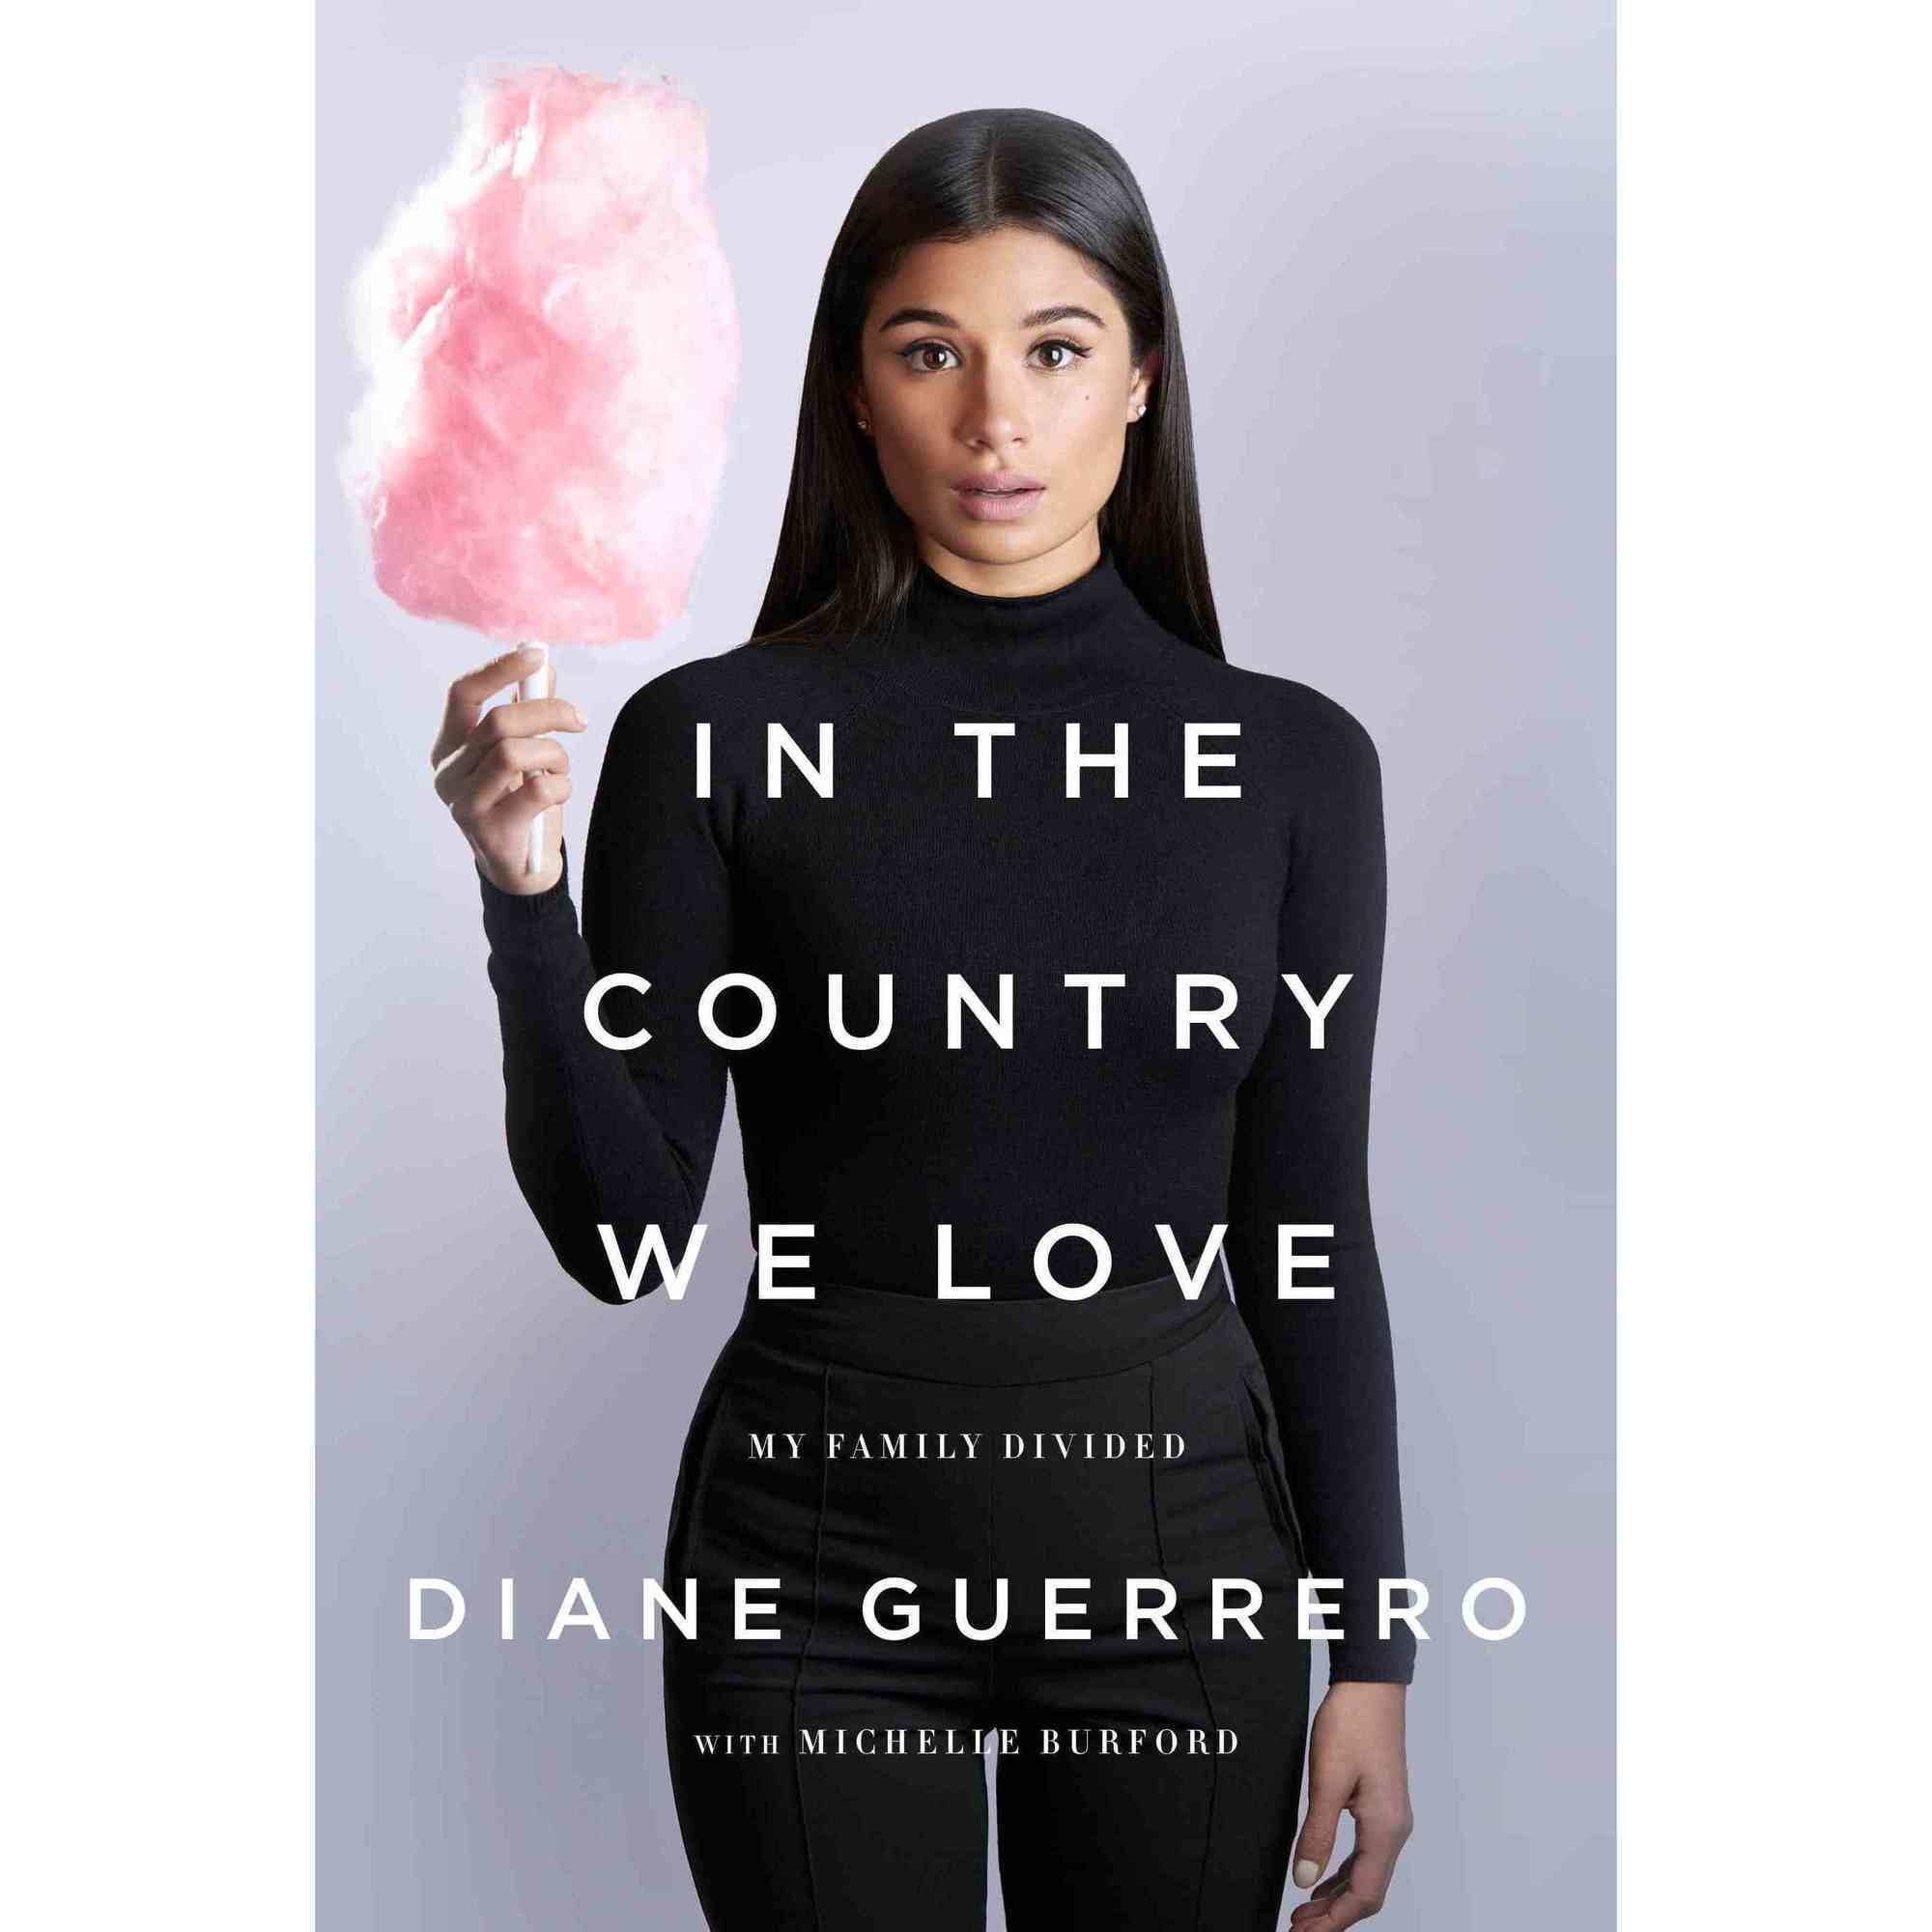 In the Country We Love by Diane Guerrero